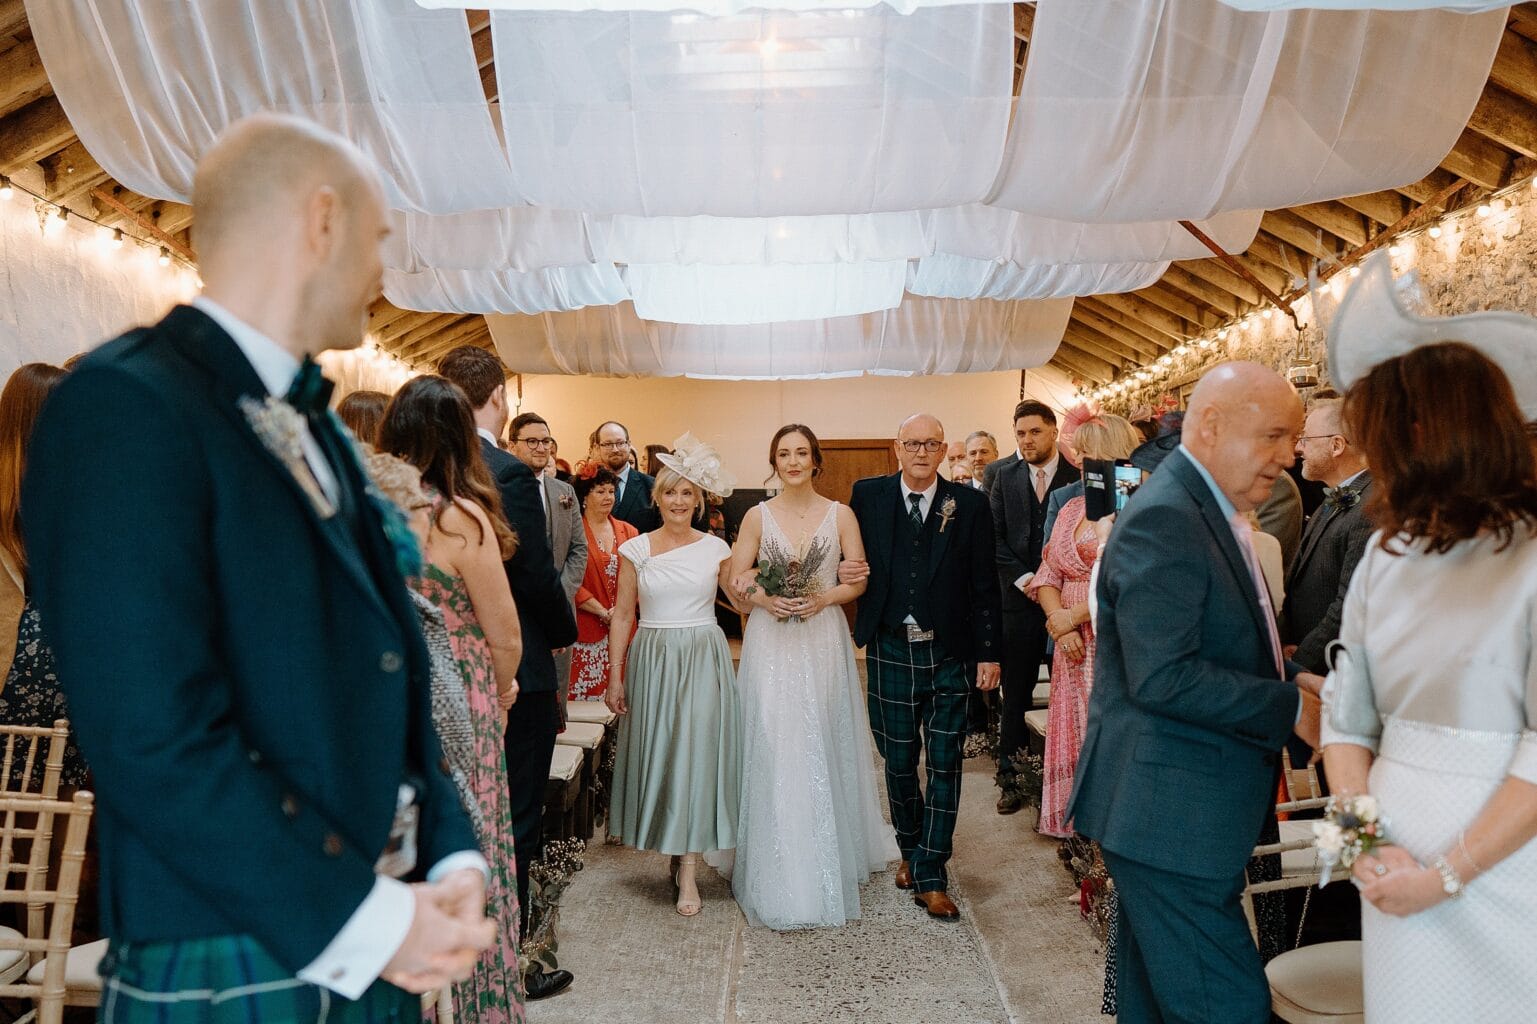 the bride walks down the aisle arm in arm with her parents as guests and the groom look on at one of the most unique farm wedding venues in scotland